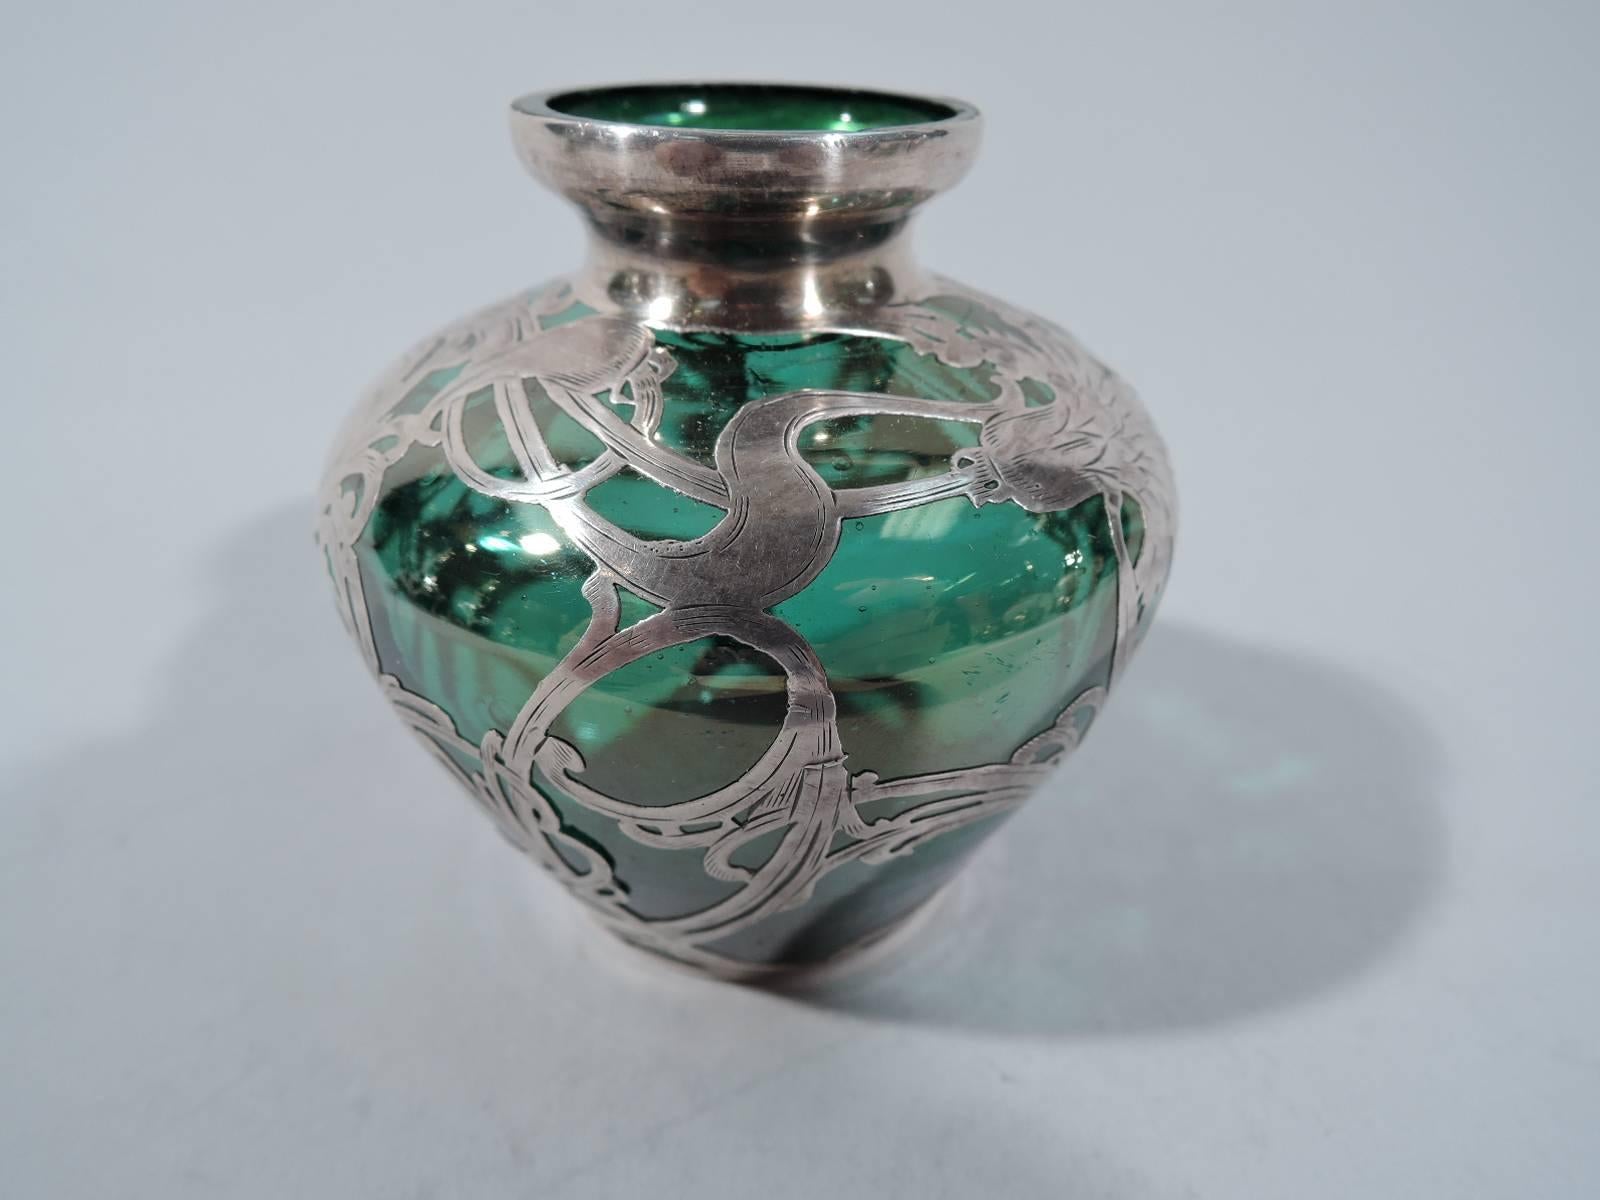 Art Nouveau emerald green glass bud vase with silver overlay. Made by La Pierre (part of International) in Newark, circa 1900. Ovoid body with short neck in silver collar. Entwined and whiplash floral overlay heightened with engraving. Scrolled